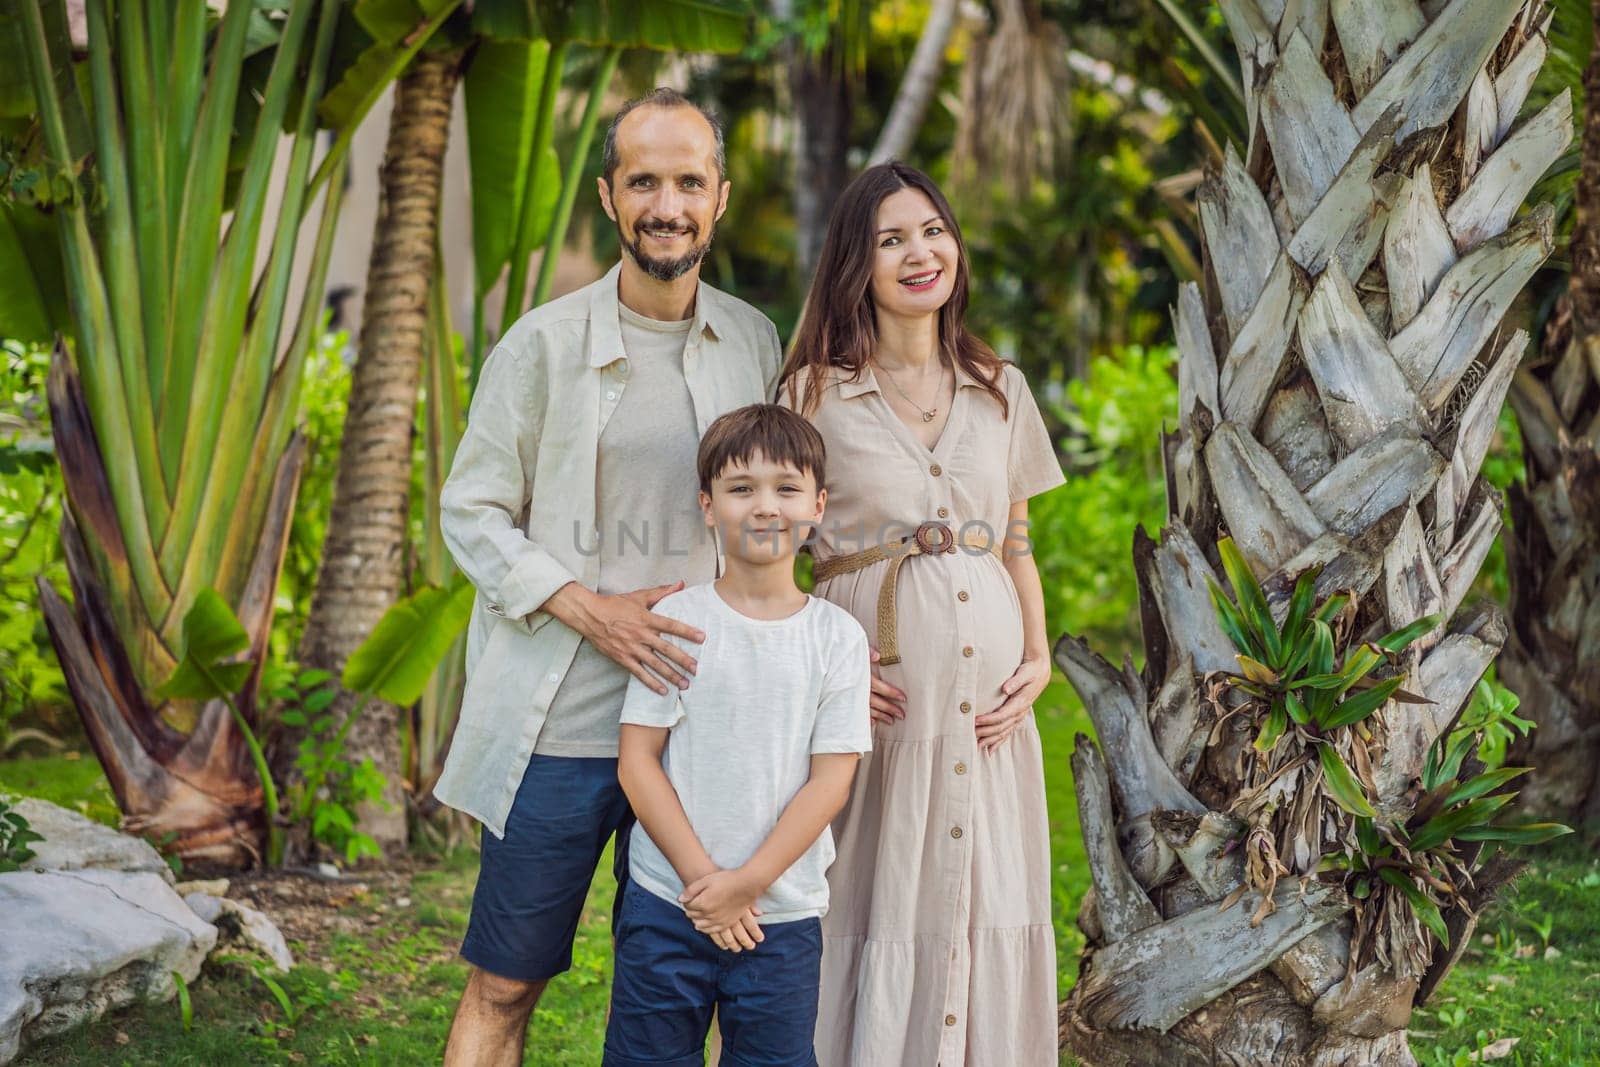 A loving family enjoying a leisurely walk in the park - a radiant pregnant woman after 40, embraced by her husband, and accompanied by their adult teenage son, savoring precious moments together amidst nature's beauty. Pregnancy after 40 concept.